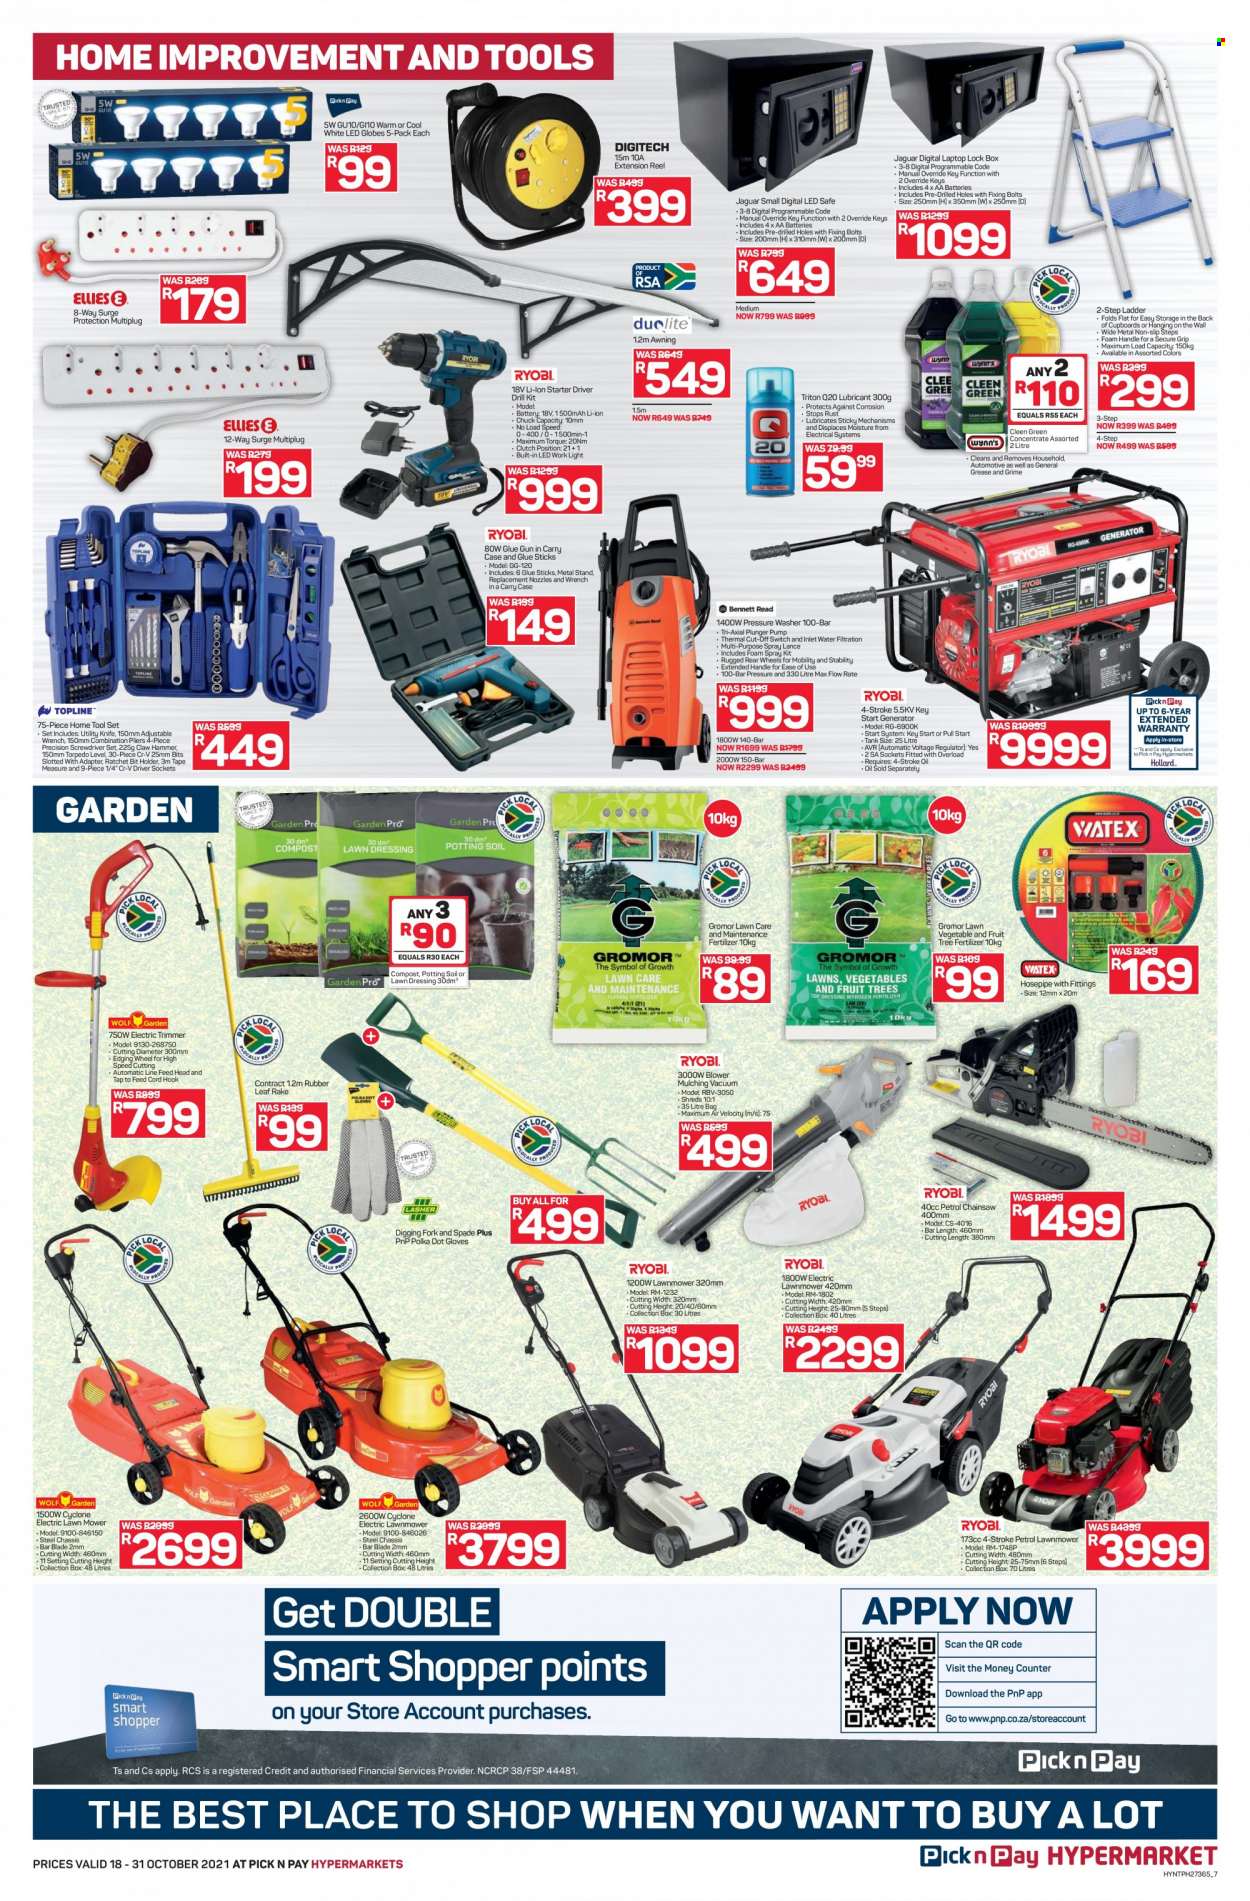 Pick n Pay specials - 10.18.2021 - 10.31.2021. 